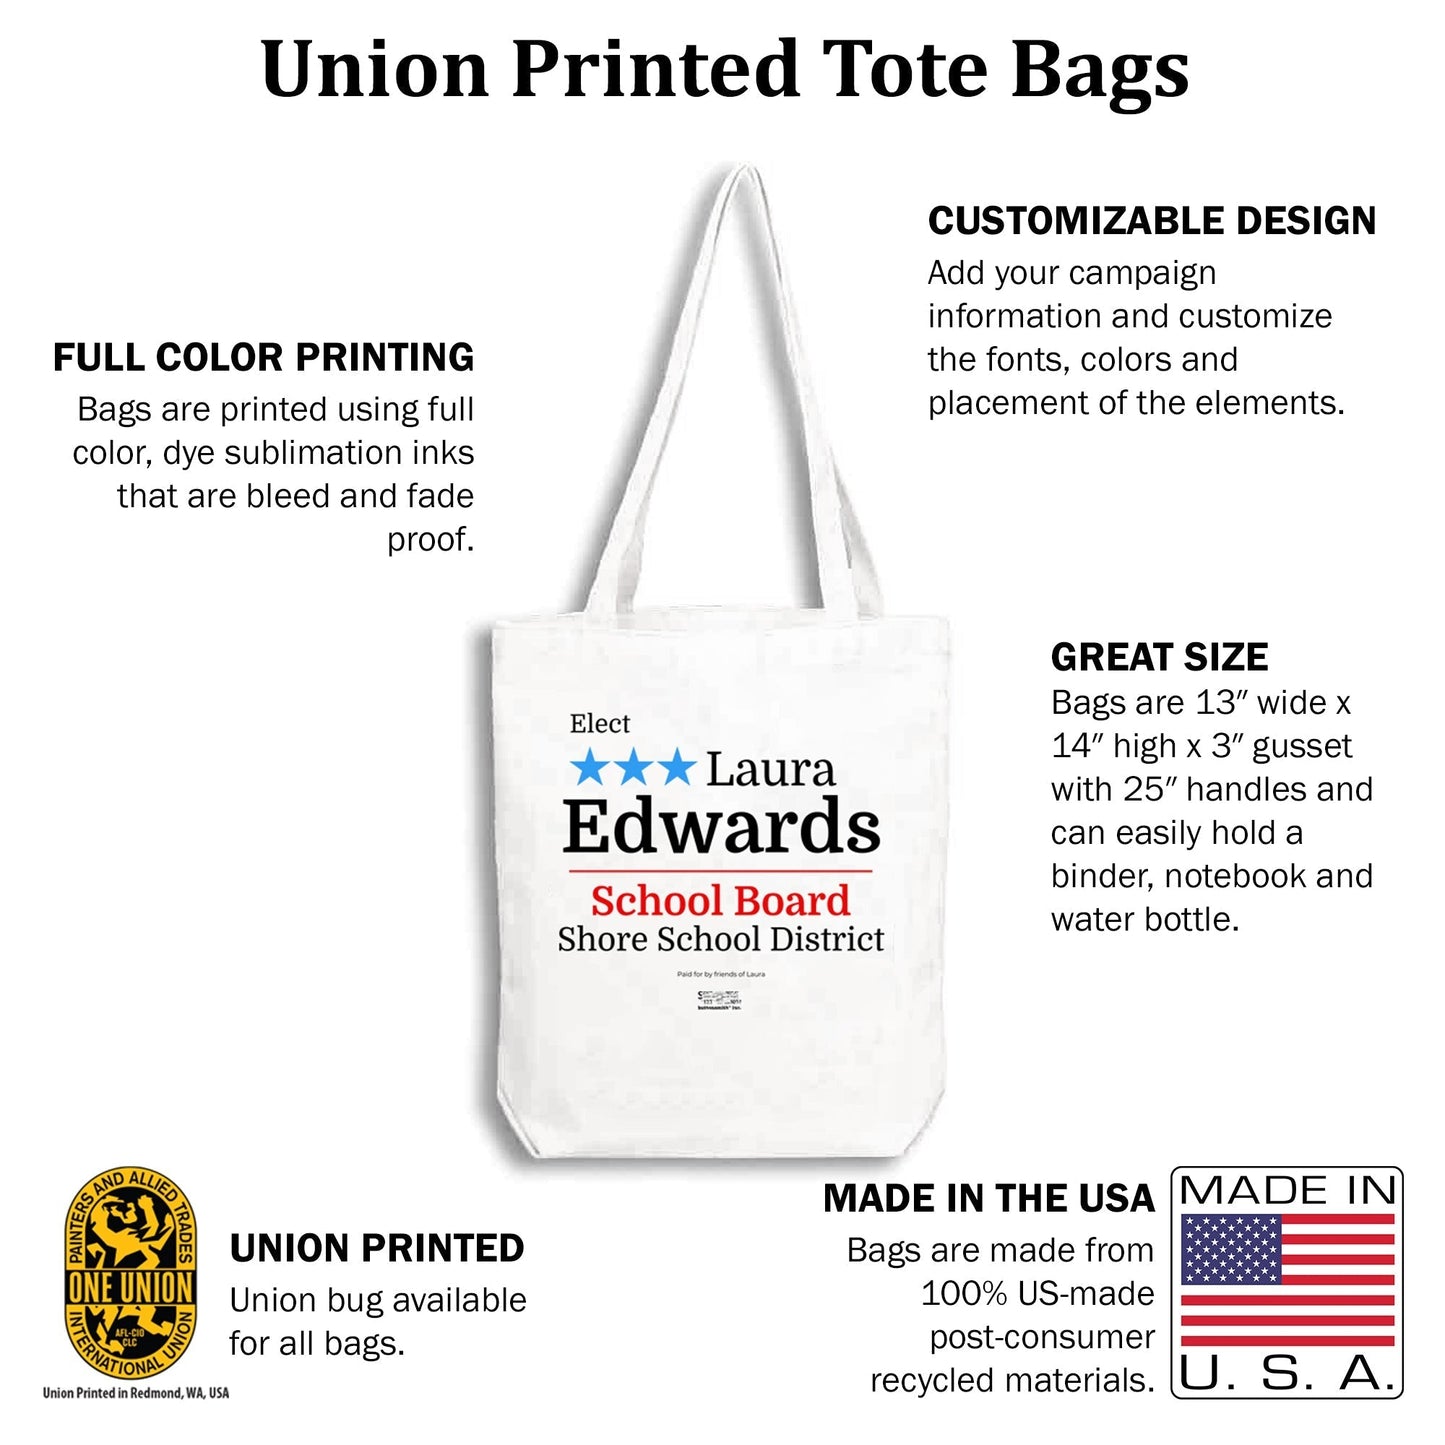 MerchBlue Union-Printed Tote Bag - Laurel design - Made in the USA from recycled fabric